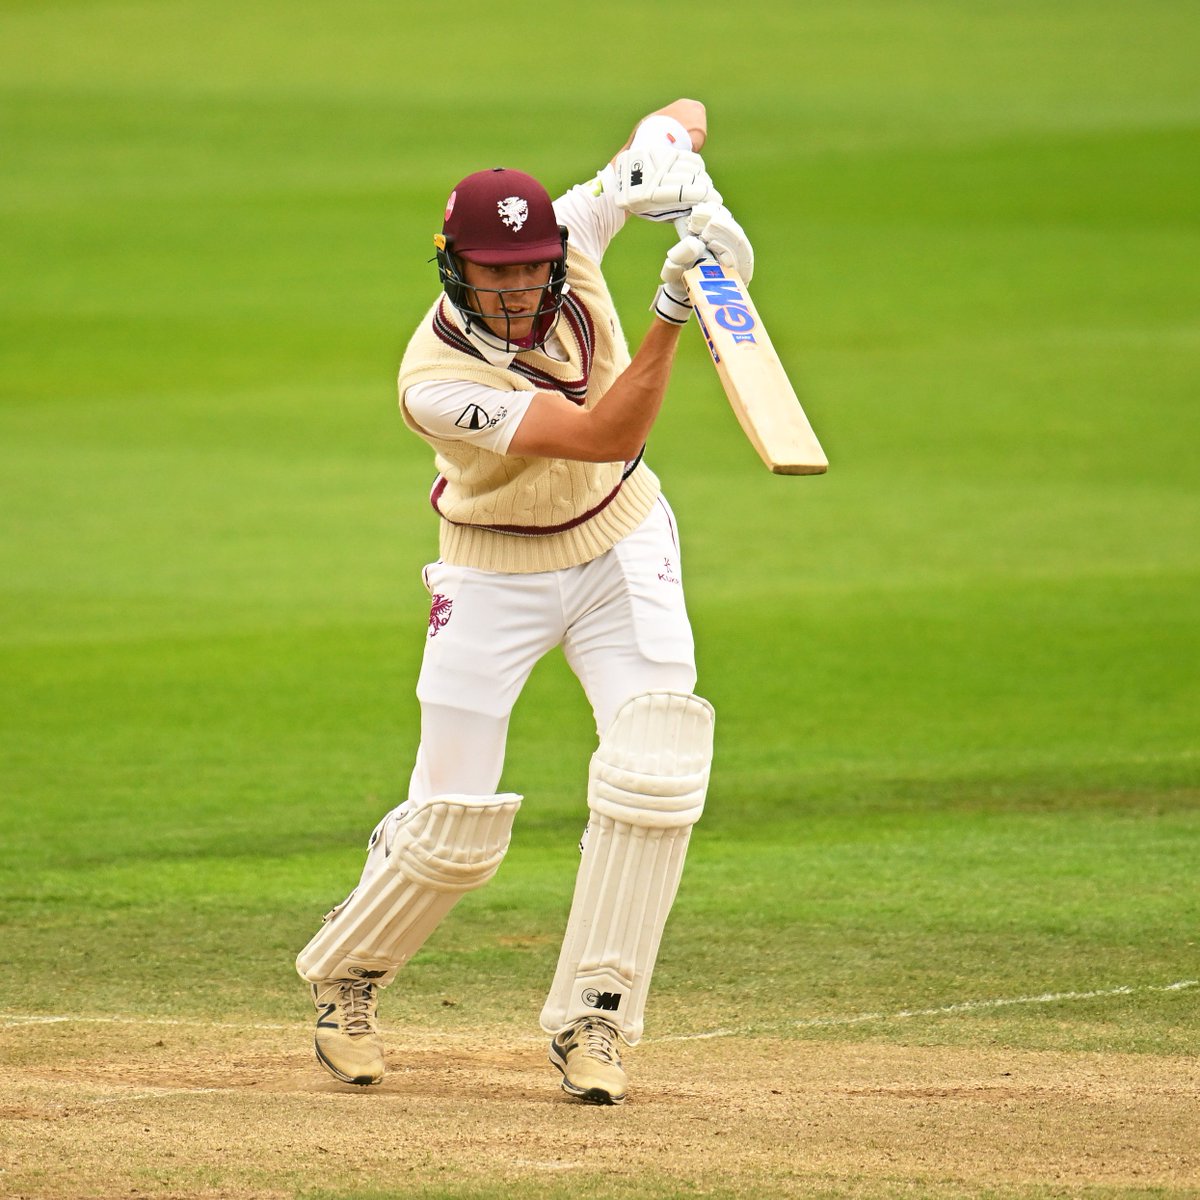 LUNCH: Gregory (43*) and Aldridge (40*) make it through to the end of the first session 👏 

Somerset 252/6, leading by 109

64 overs left in the day

#SURvSOM
#WeAreSomerset